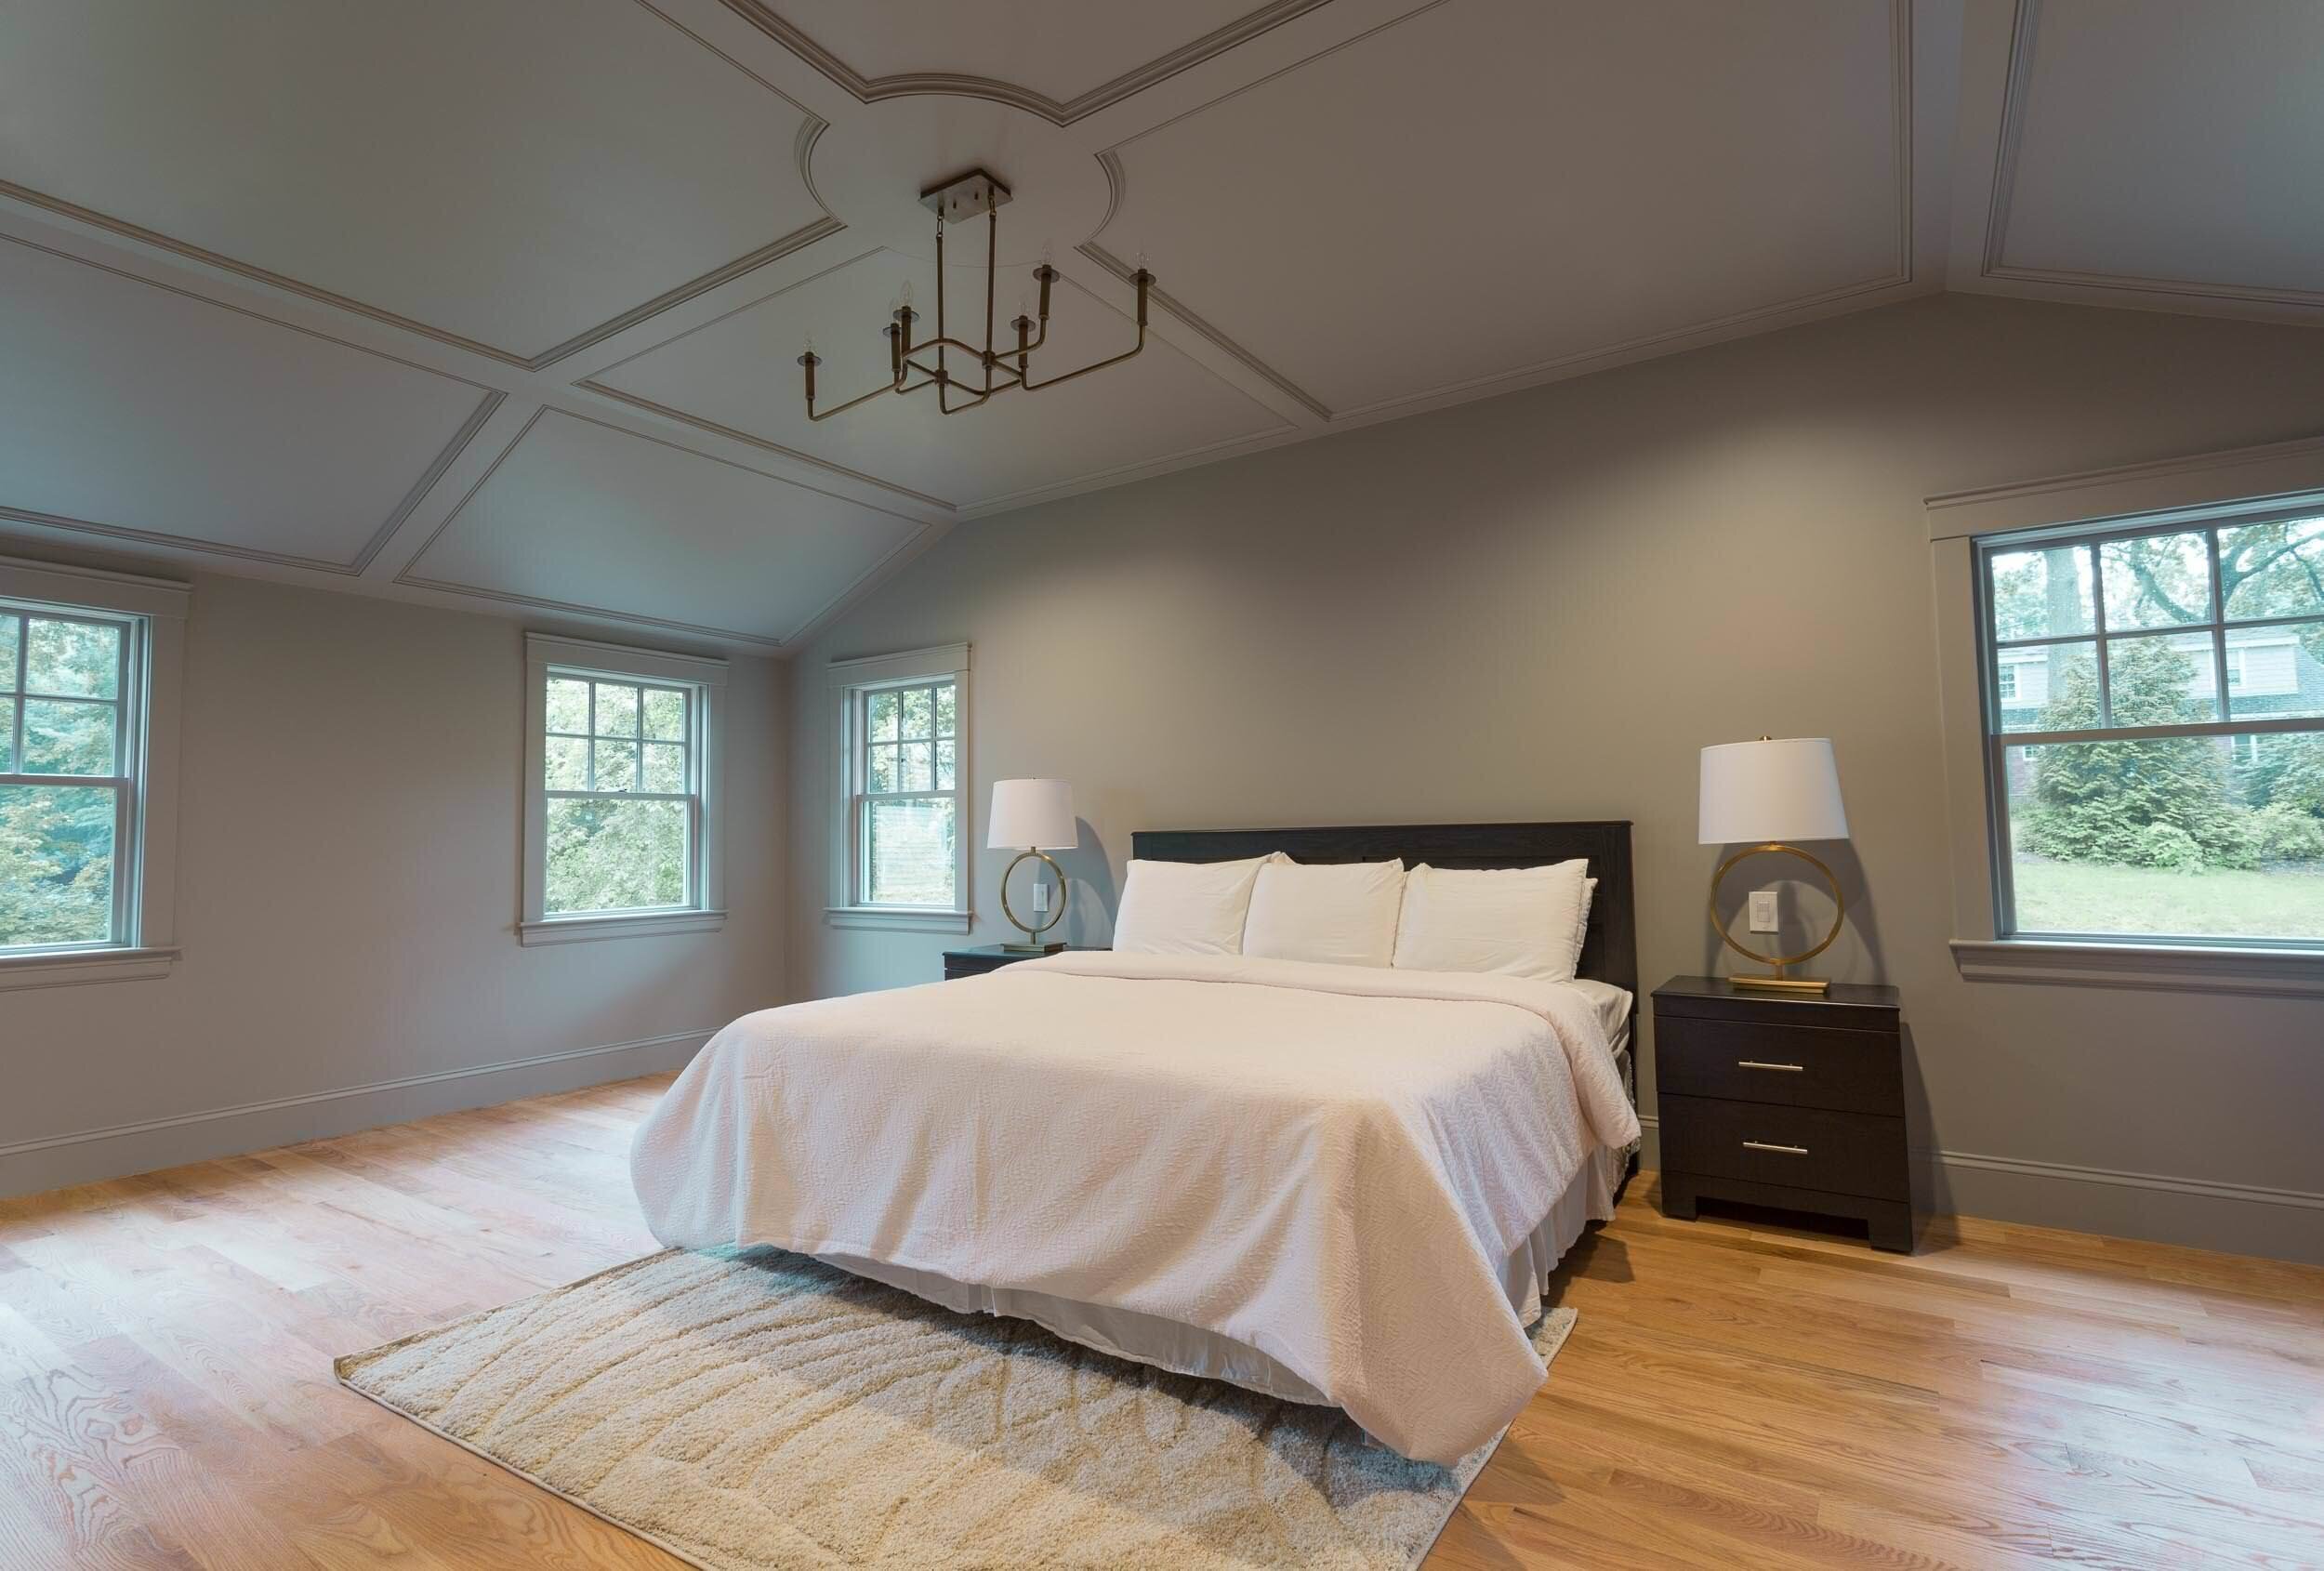 5 Ways To Paint Your Ceiling In 2020, Paint Ceilings White Or Wall Color